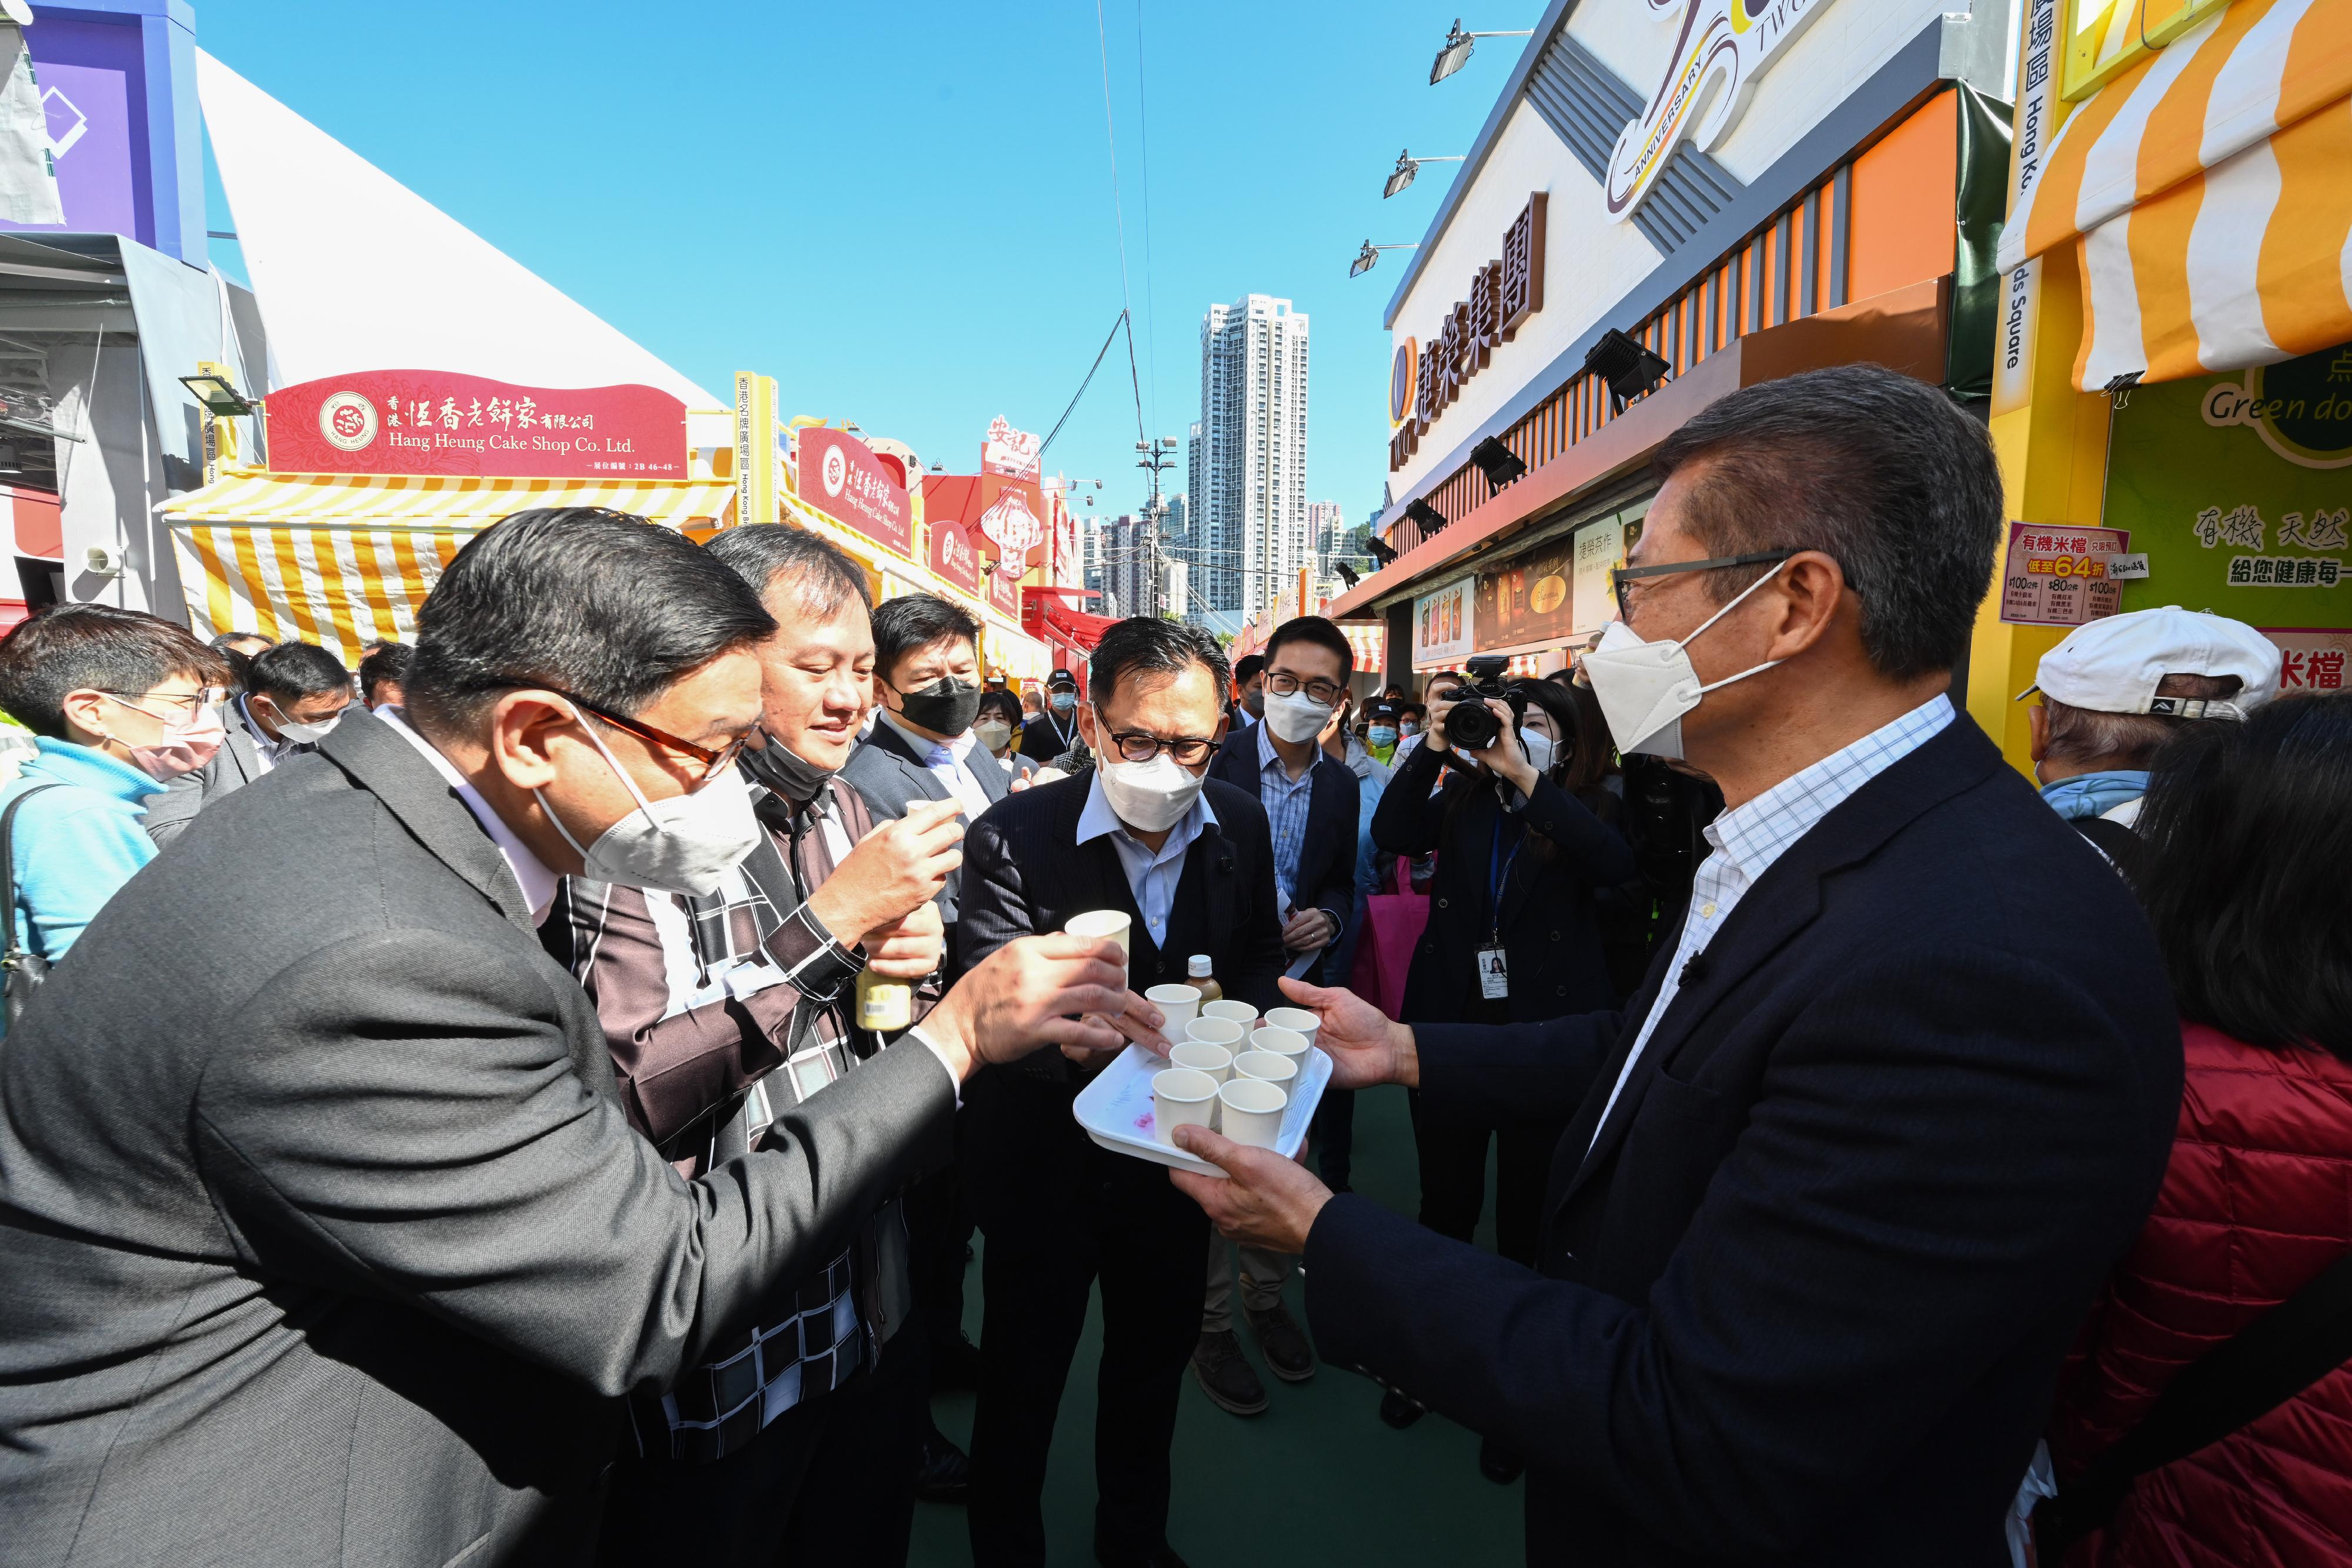 The Financial Secretary, Mr Paul Chan, today (December 22) visited the 56th Hong Kong Brands and Products Expo with Consuls-General from five countries of Association of Southeast Asian Nations in Hong Kong. Photo shows Mr Chan (first right) inviting Consuls-General to taste the drinks at the Expo.